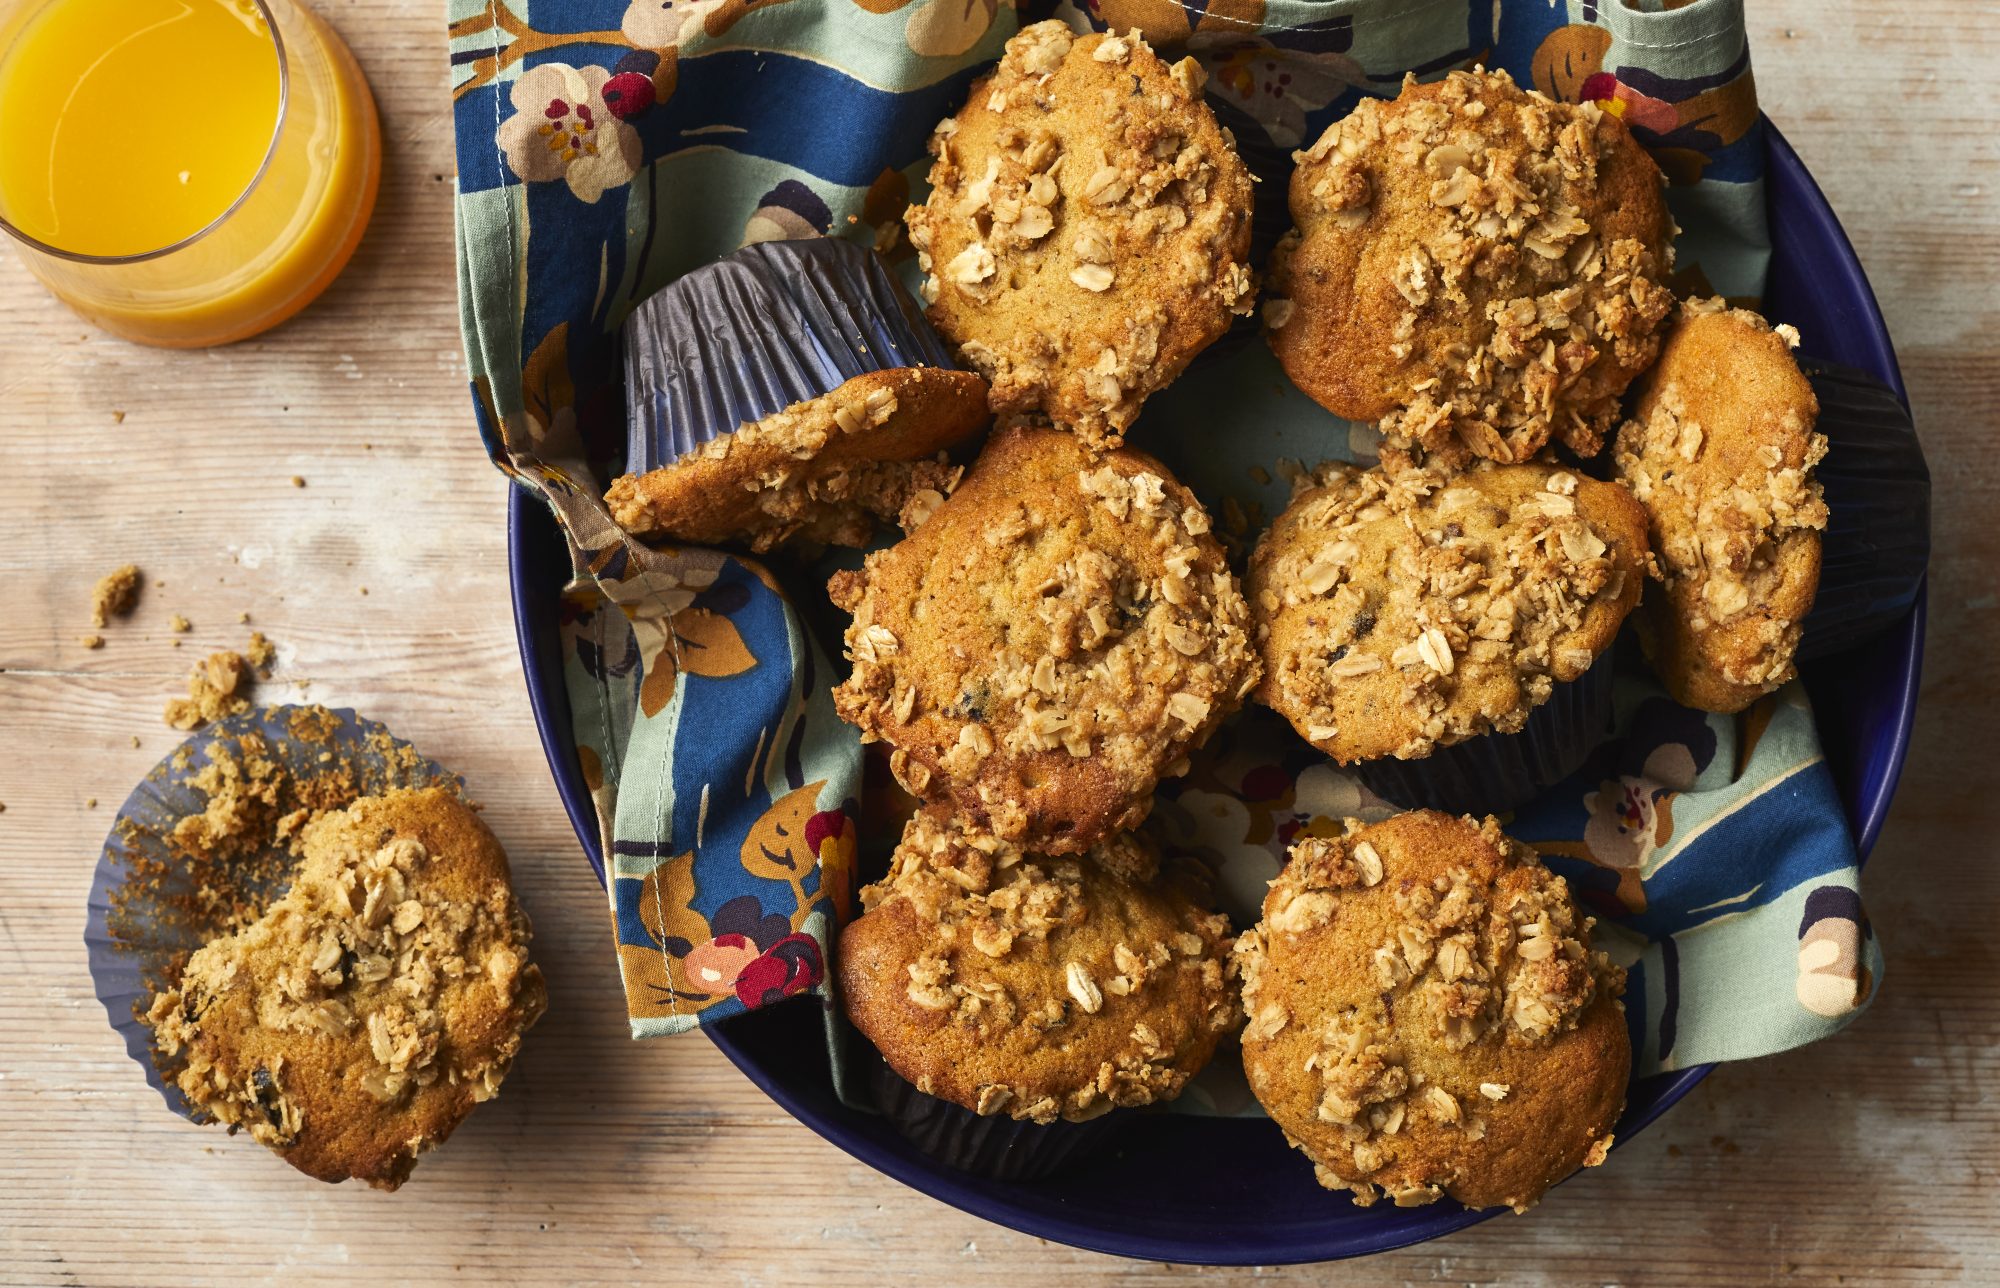 Toasted Oat and Prune Breakfast Muffins Recipe